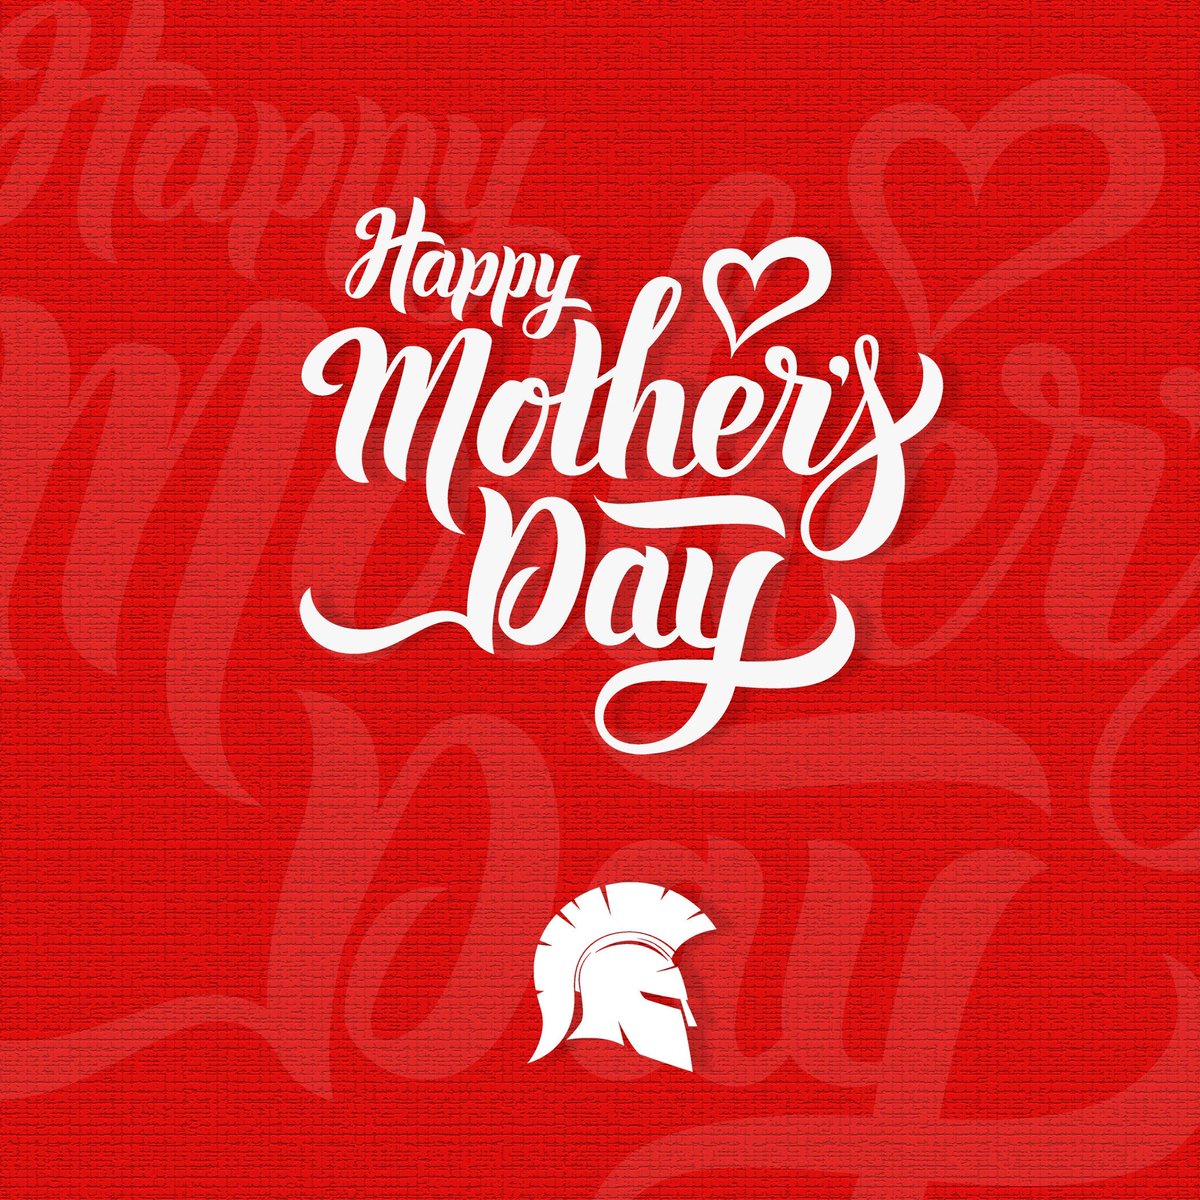 For all the moms out there, especially the CV lacrosse moms, Happy Mother's Day.